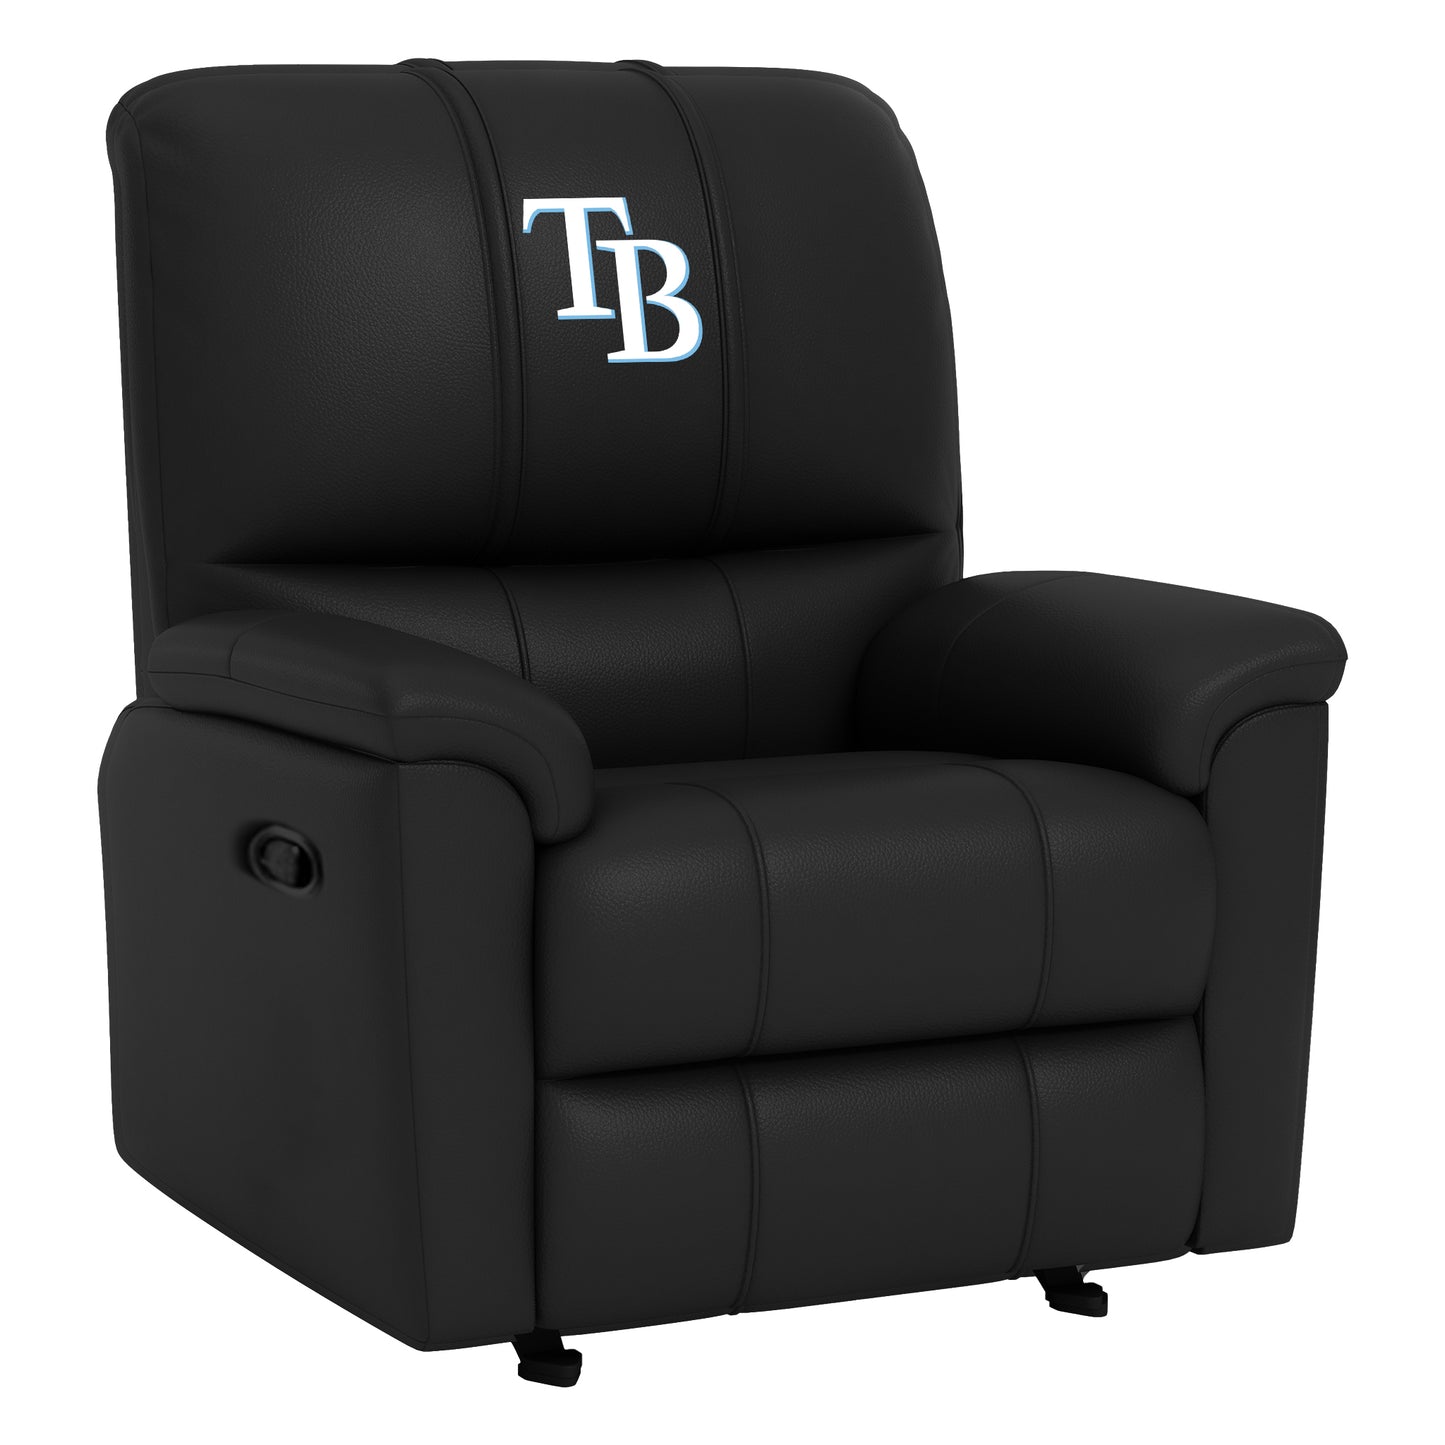 Rocker Recliner with Tampa Bay Rays Secondary